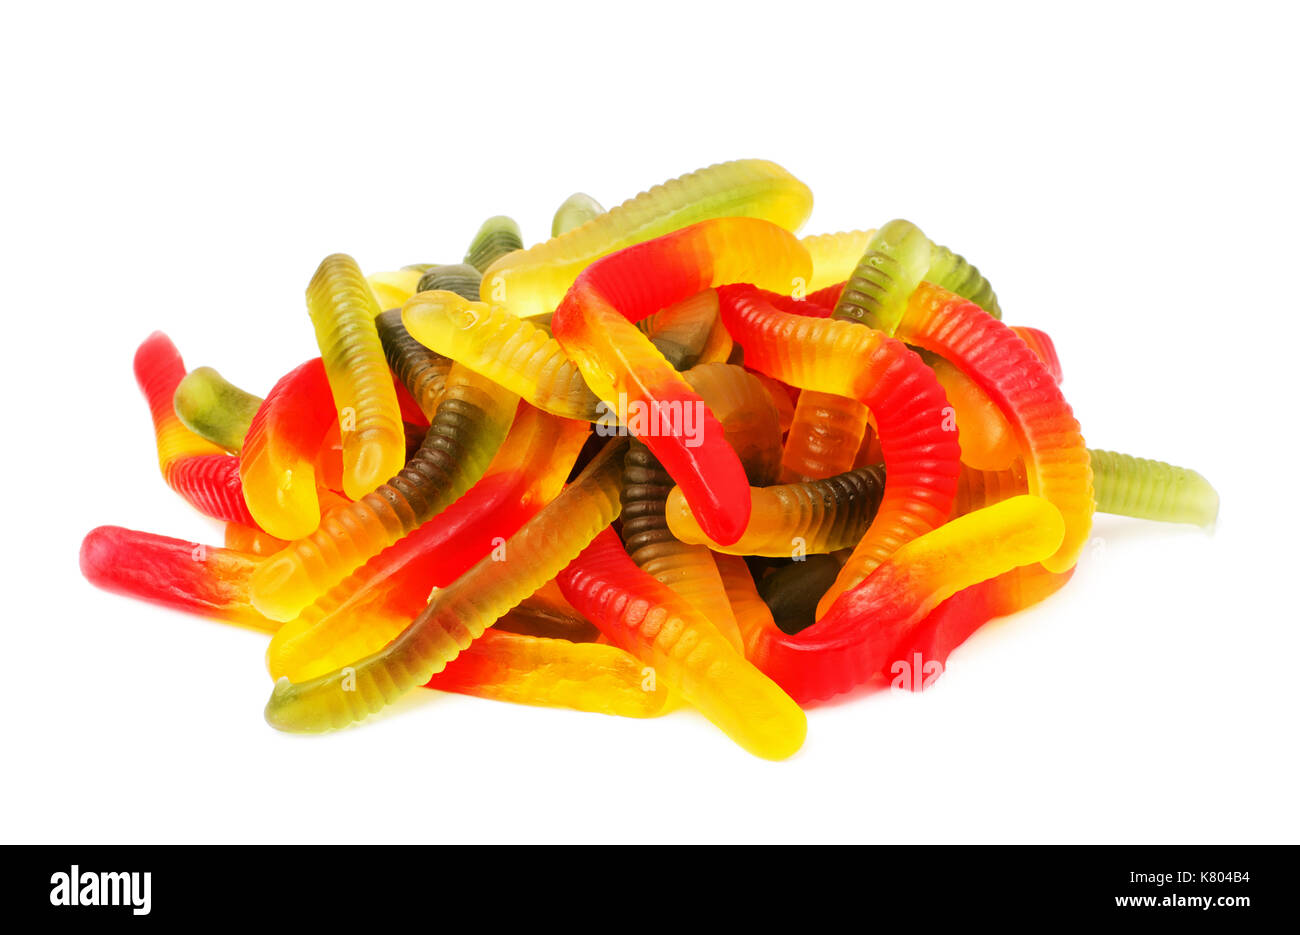 Tasty jelly worms isolated on white background Stock Photo